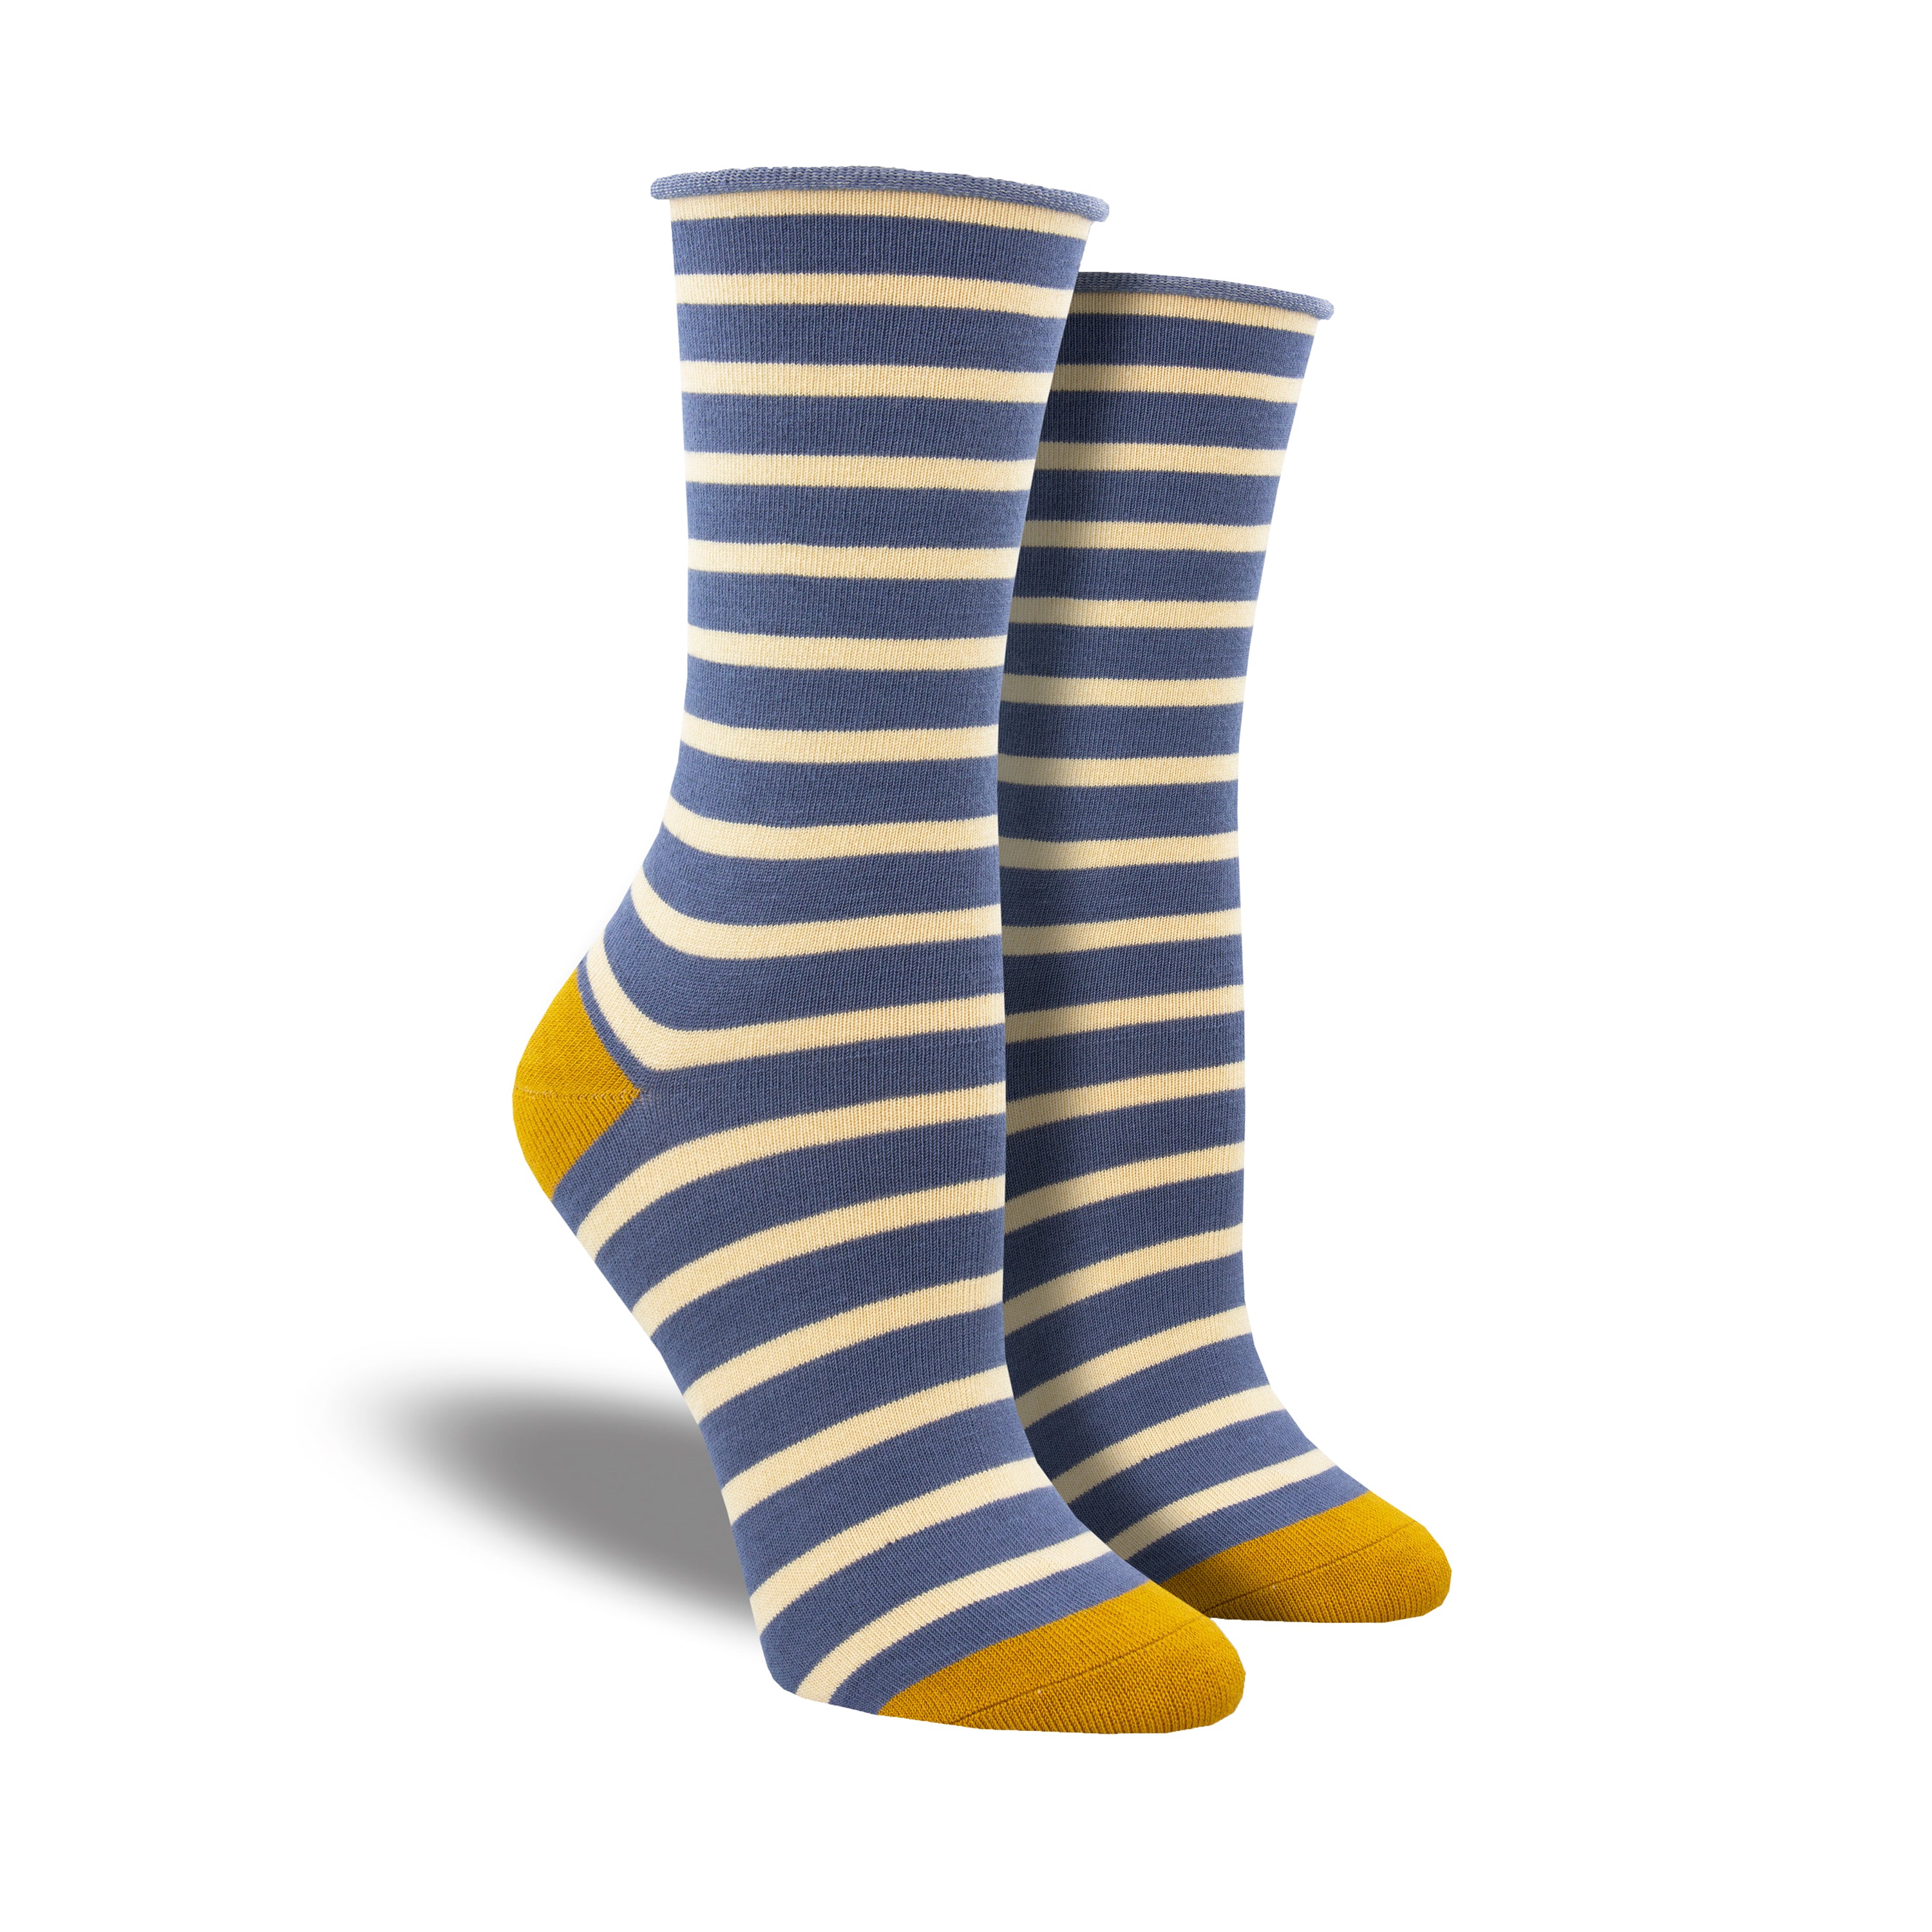 Shown on leg forms, a pair of Socksmith brand women's bamboo crew roll-top socks in blue and white stripes with a yellow heel and toe.